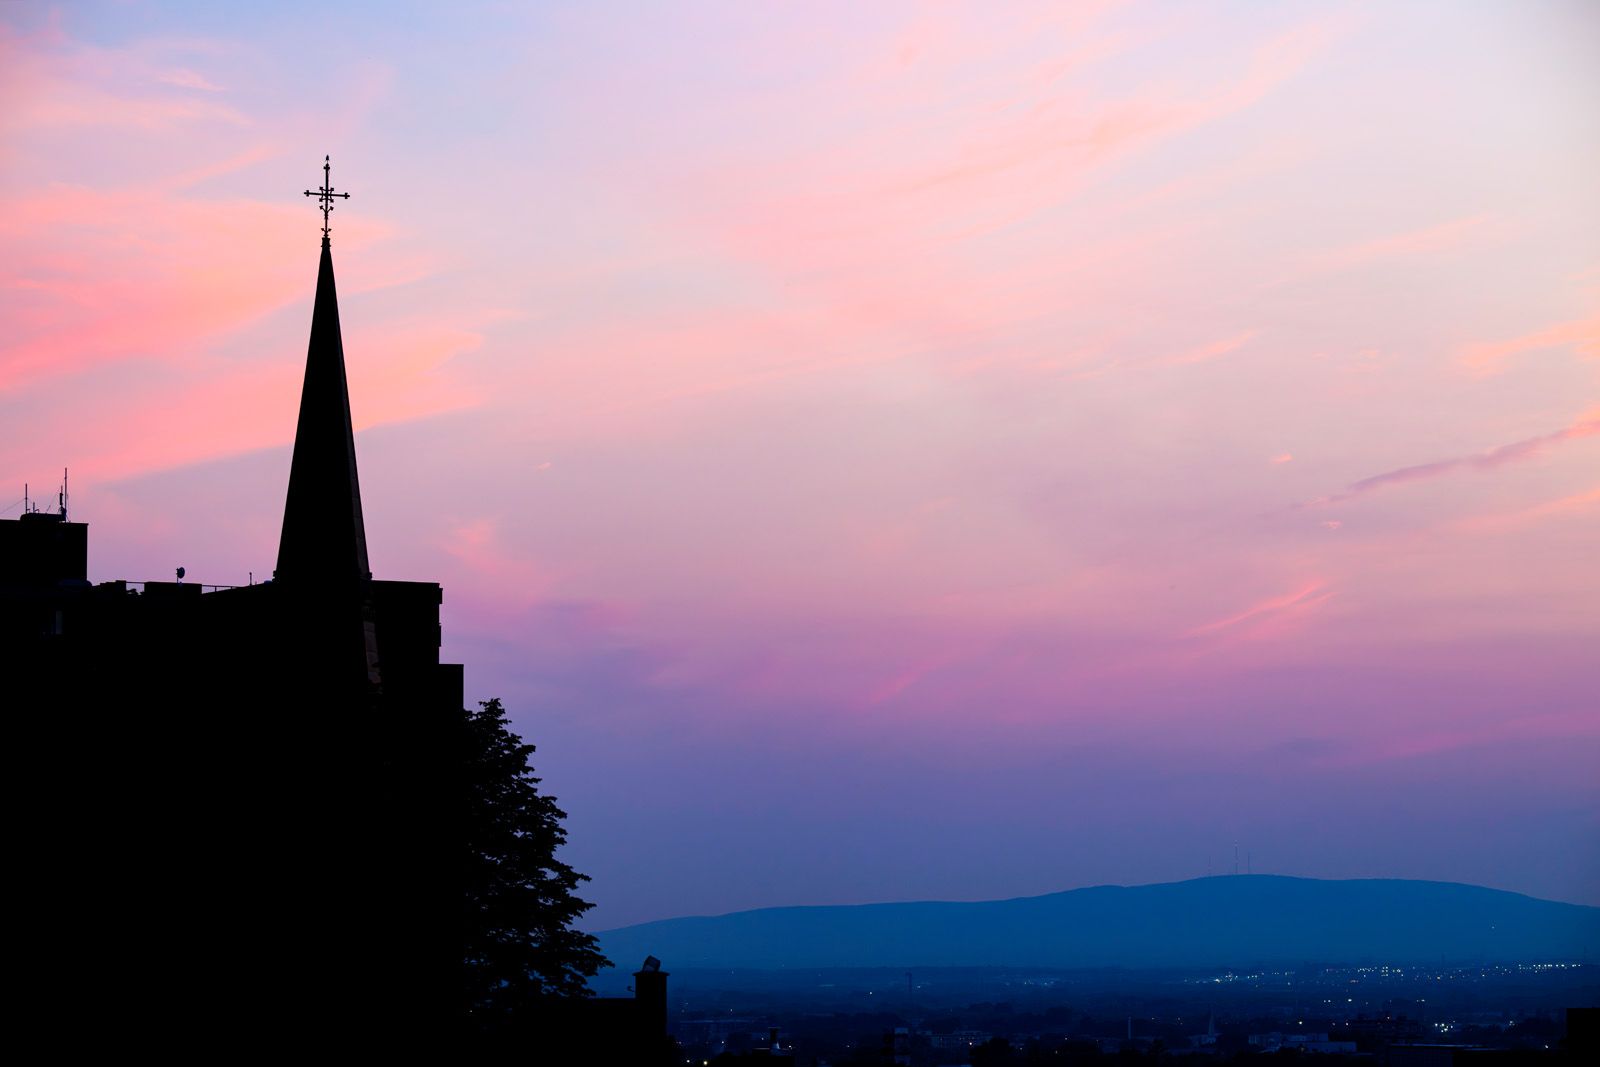 A steeple silhouetted at sunset as seen from the Hilton Quebec in Quebec City, QC.